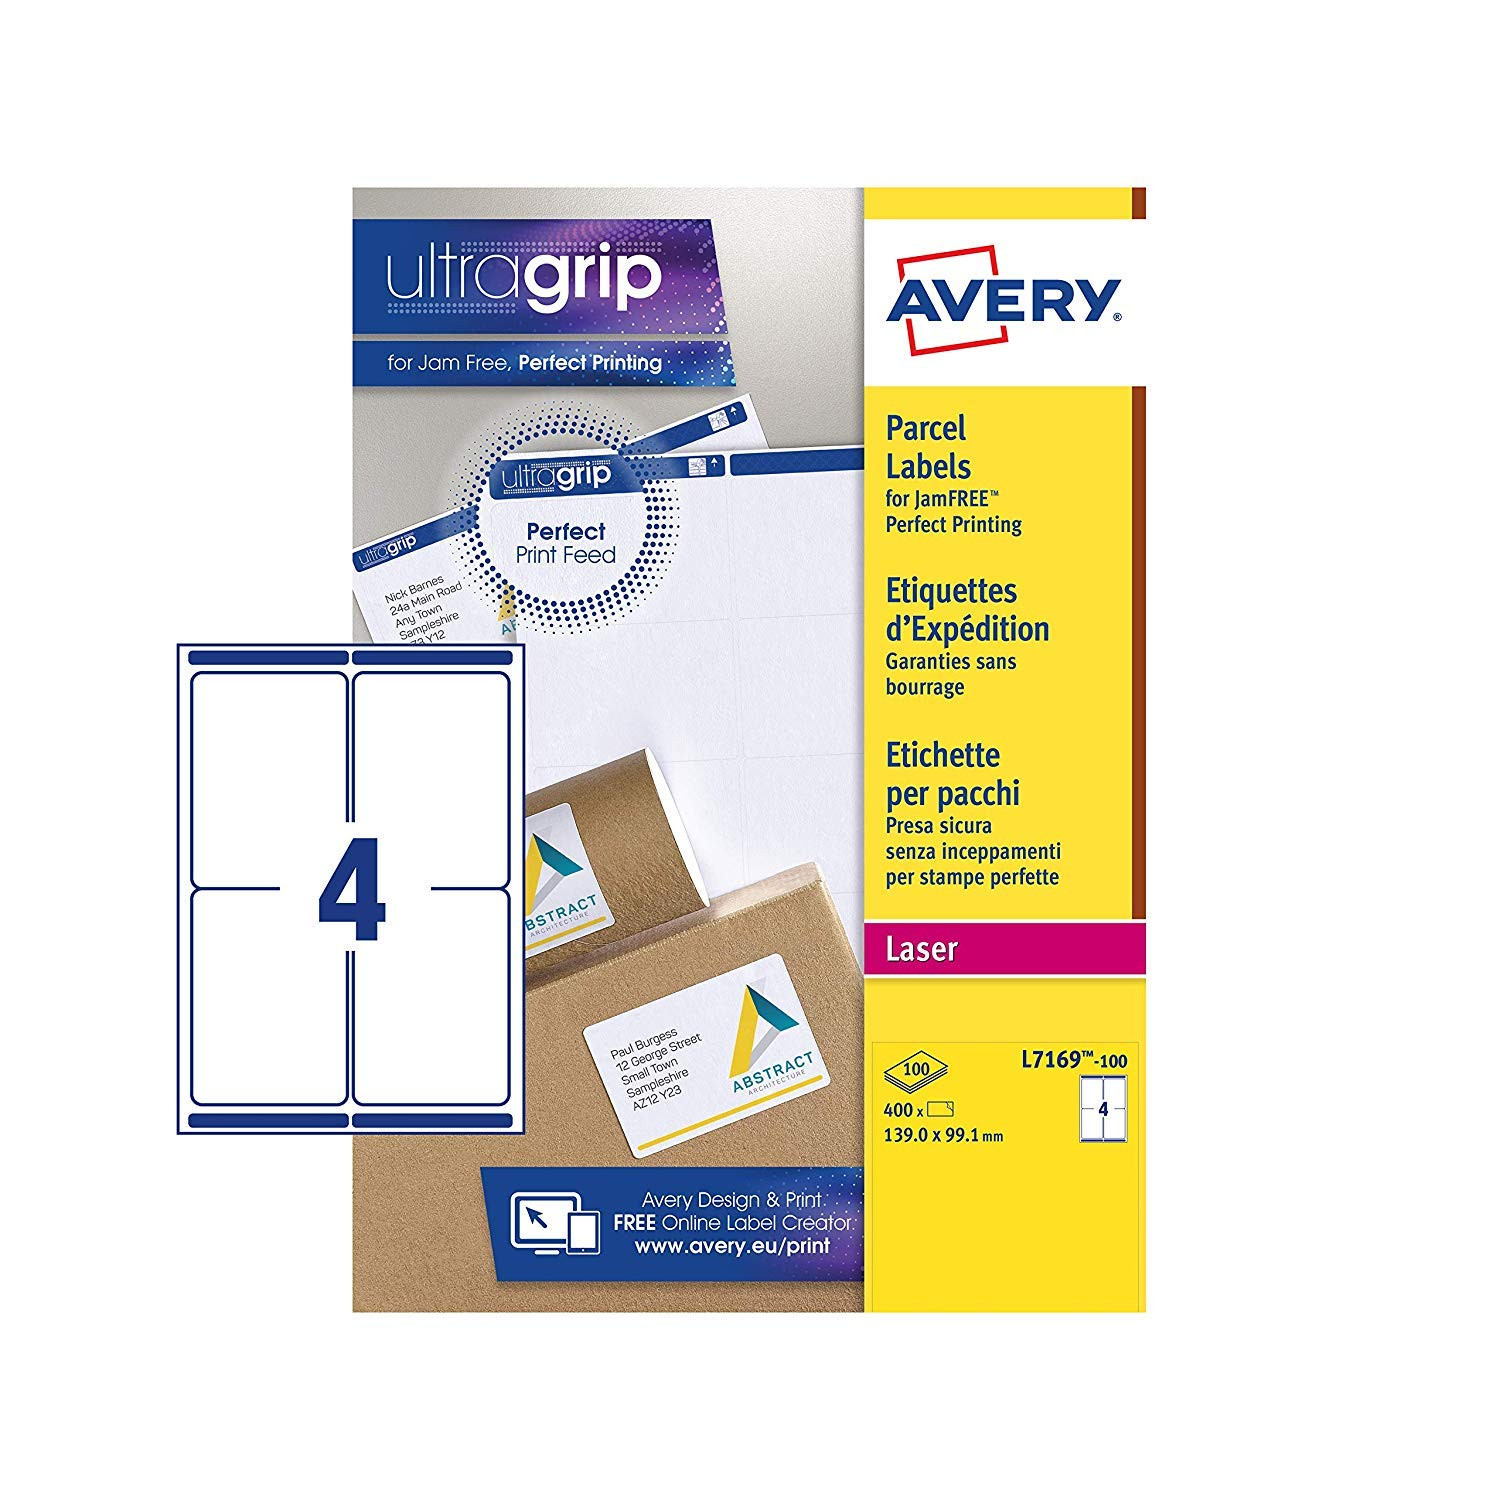 Avery L7169 Self Adhesive Parcel Shipping Labels Laser Printers 4 Labels Per A4 Sheet 400 Labels Ultragrip Of Avery Templates Business Cards 10 Per Sheet